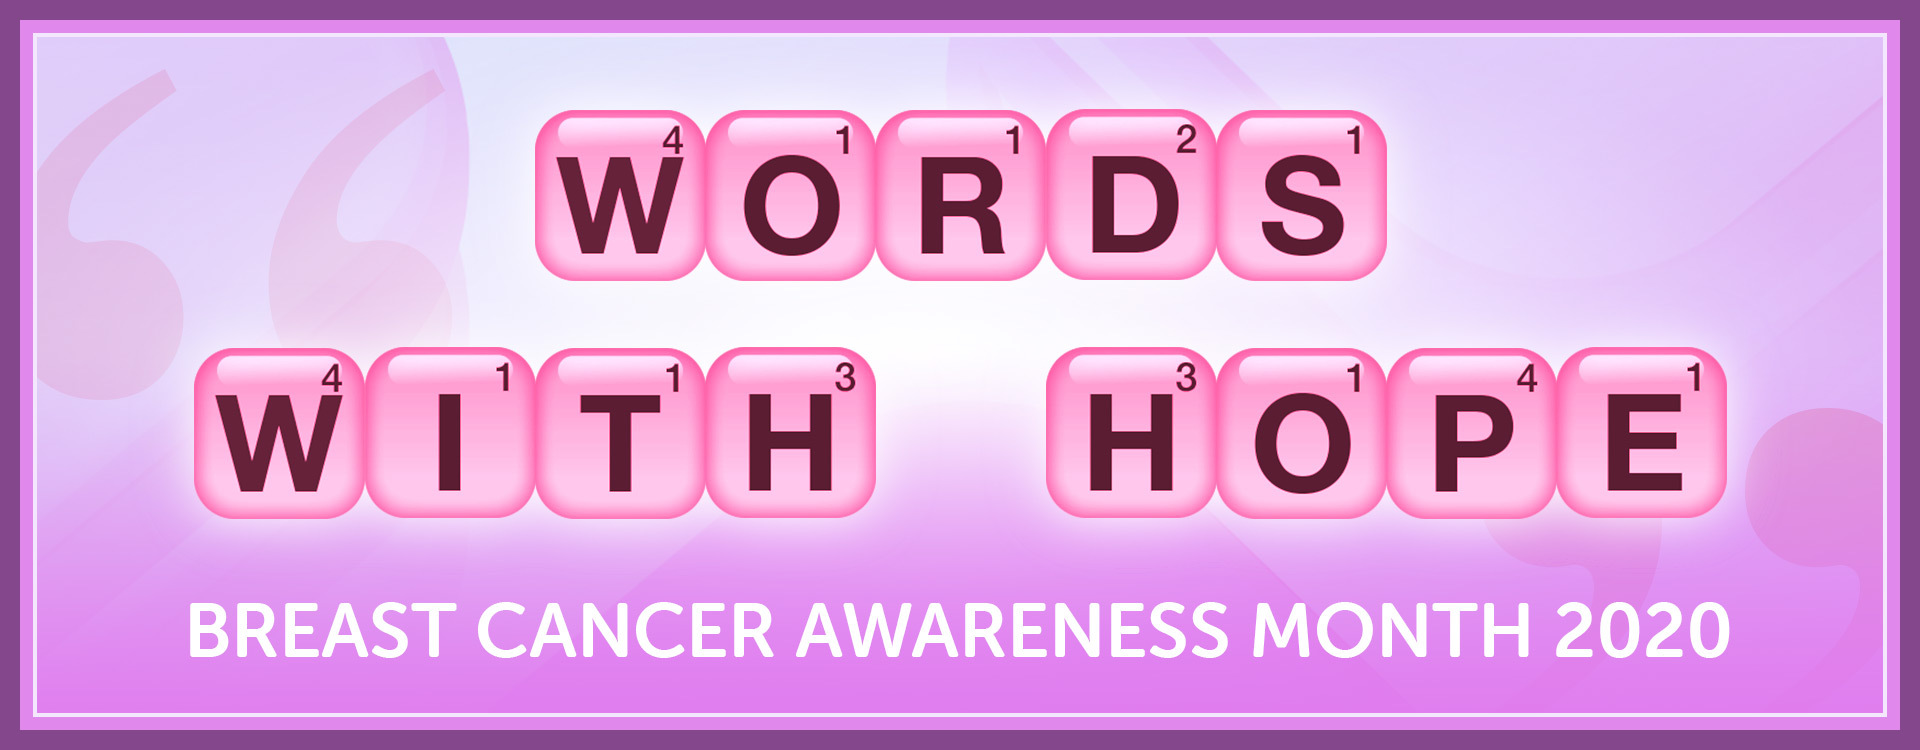 Words With Friends and the American Cancer Society Partner for